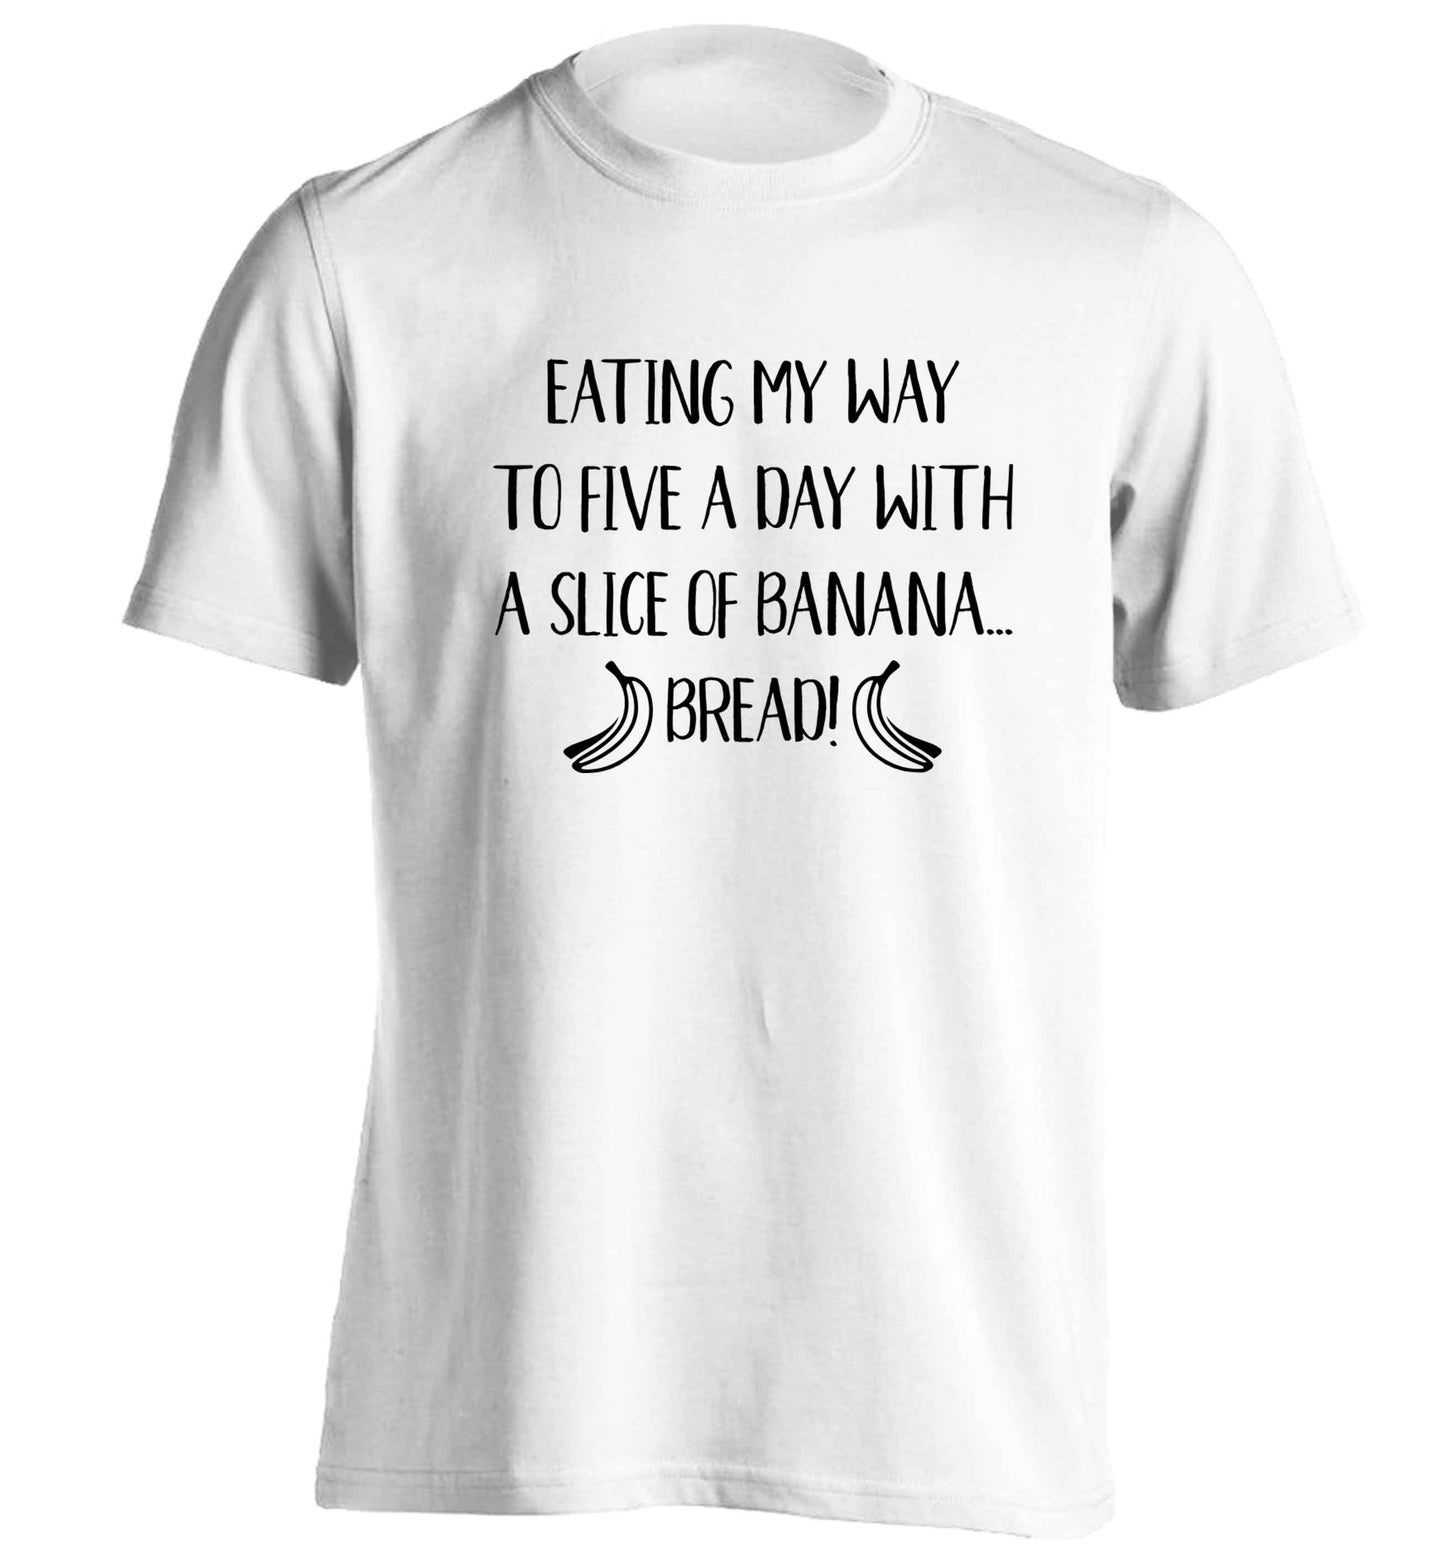 Eating my way to five a day with a slice of banana bread adults unisex white Tshirt 2XL